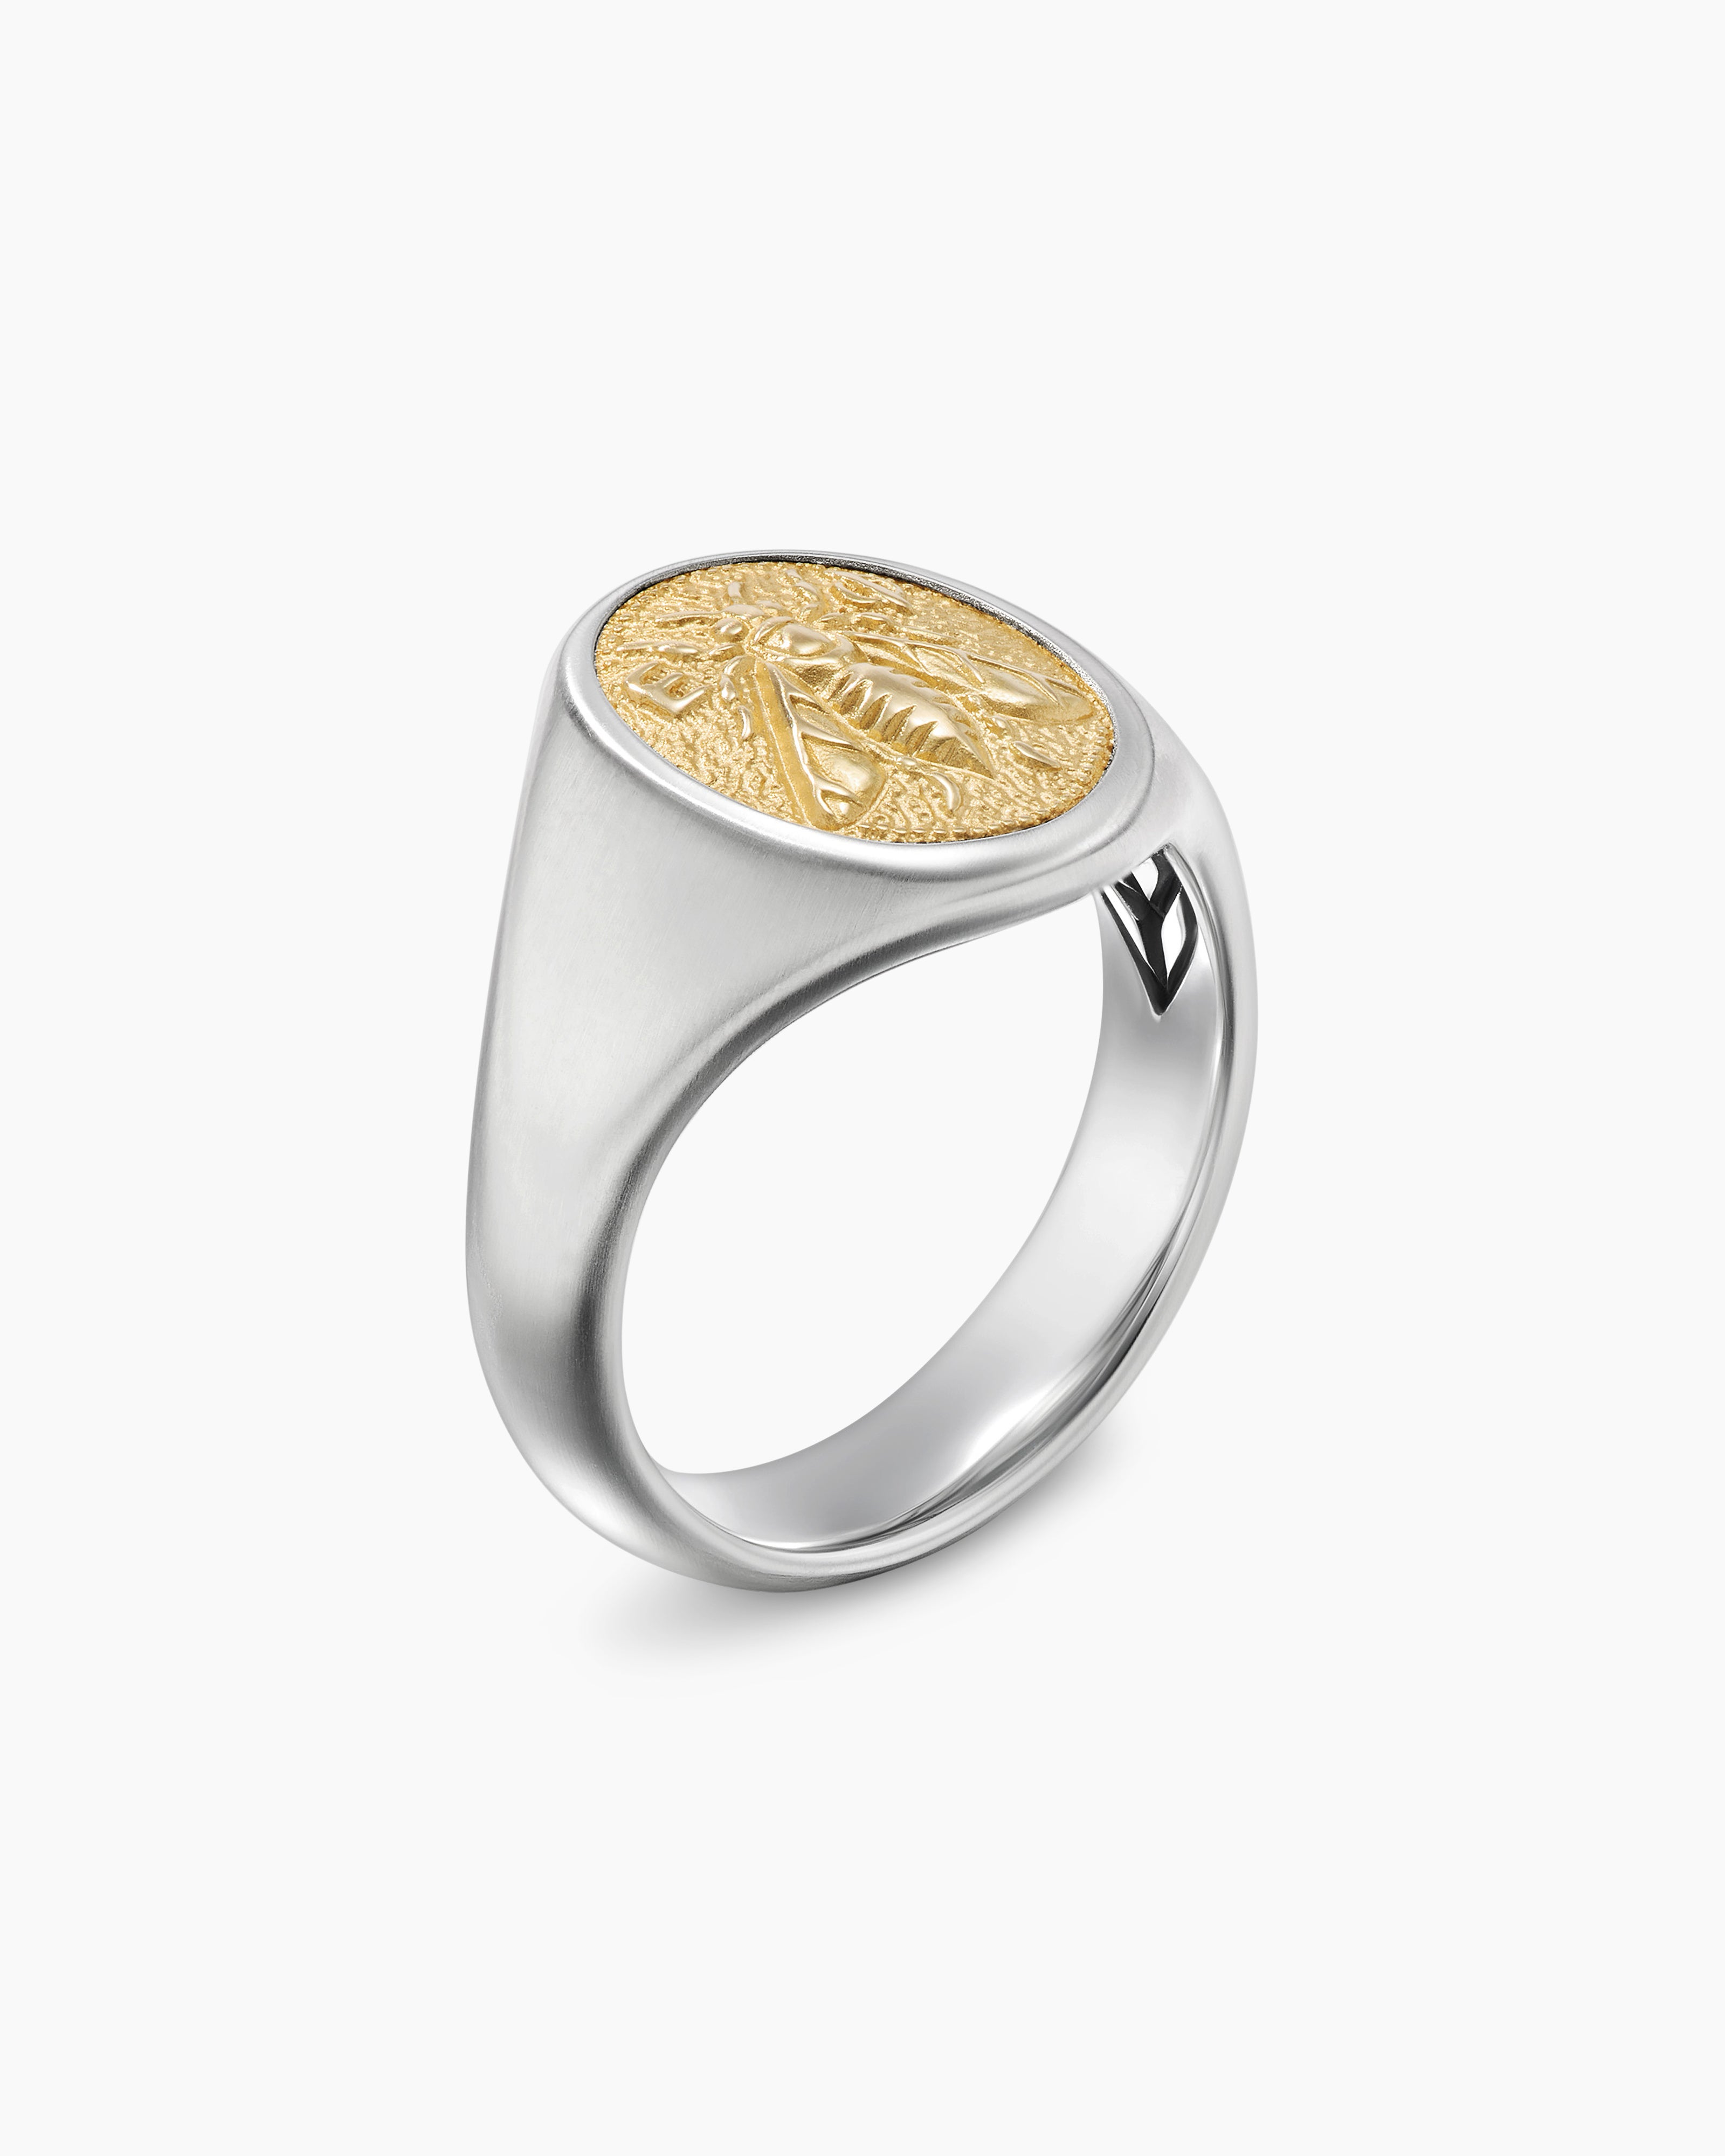 Petrvs Bee Pinky Ring in Sterling Silver with 18K Yellow Gold